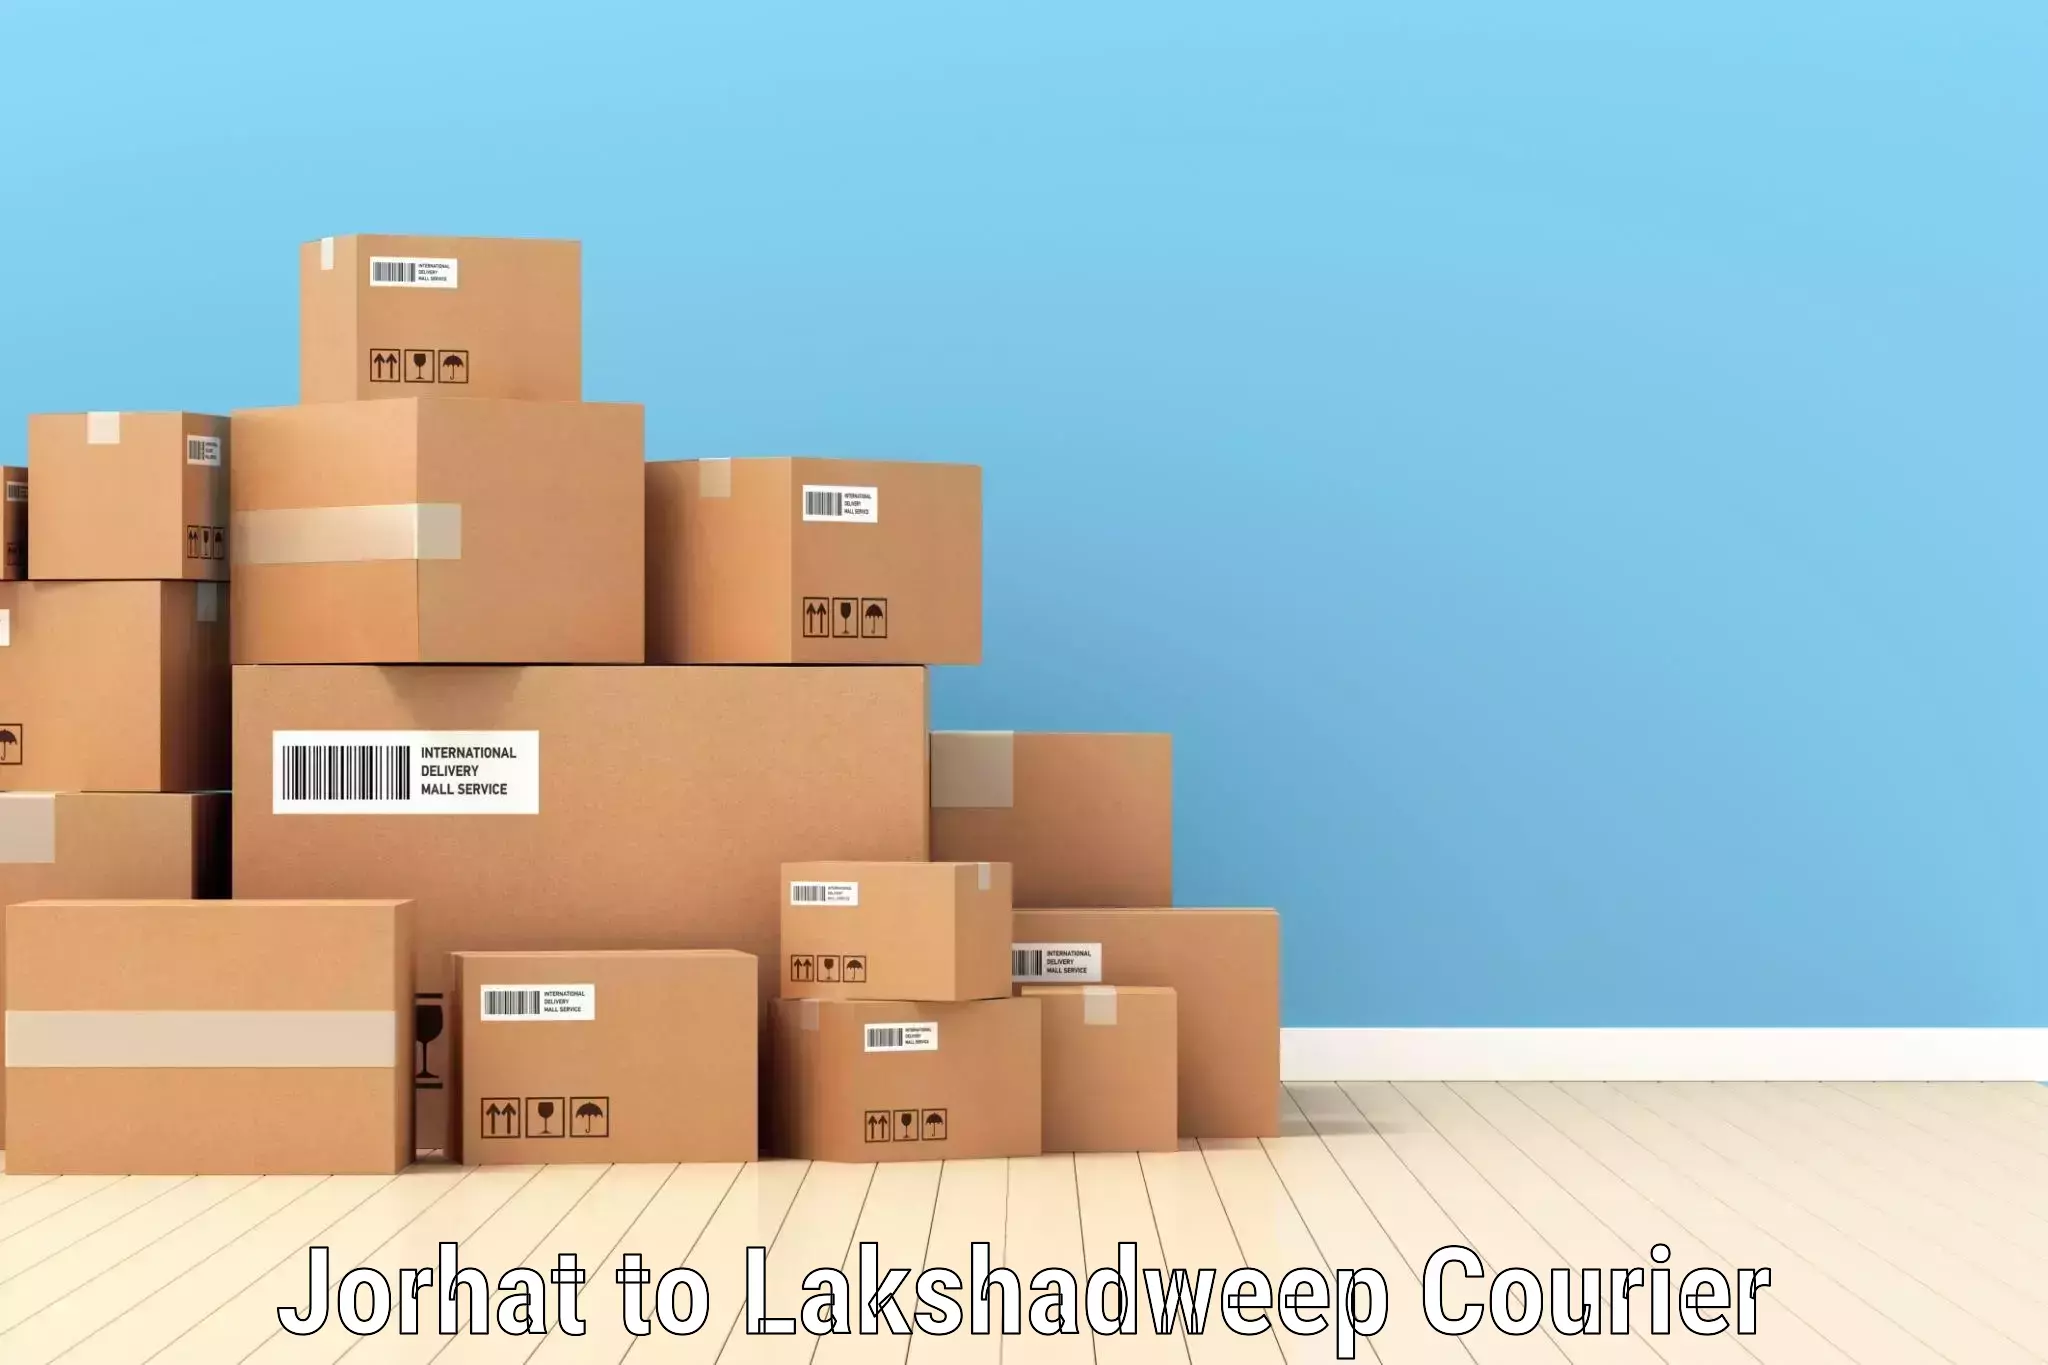 Express delivery capabilities Jorhat to Lakshadweep